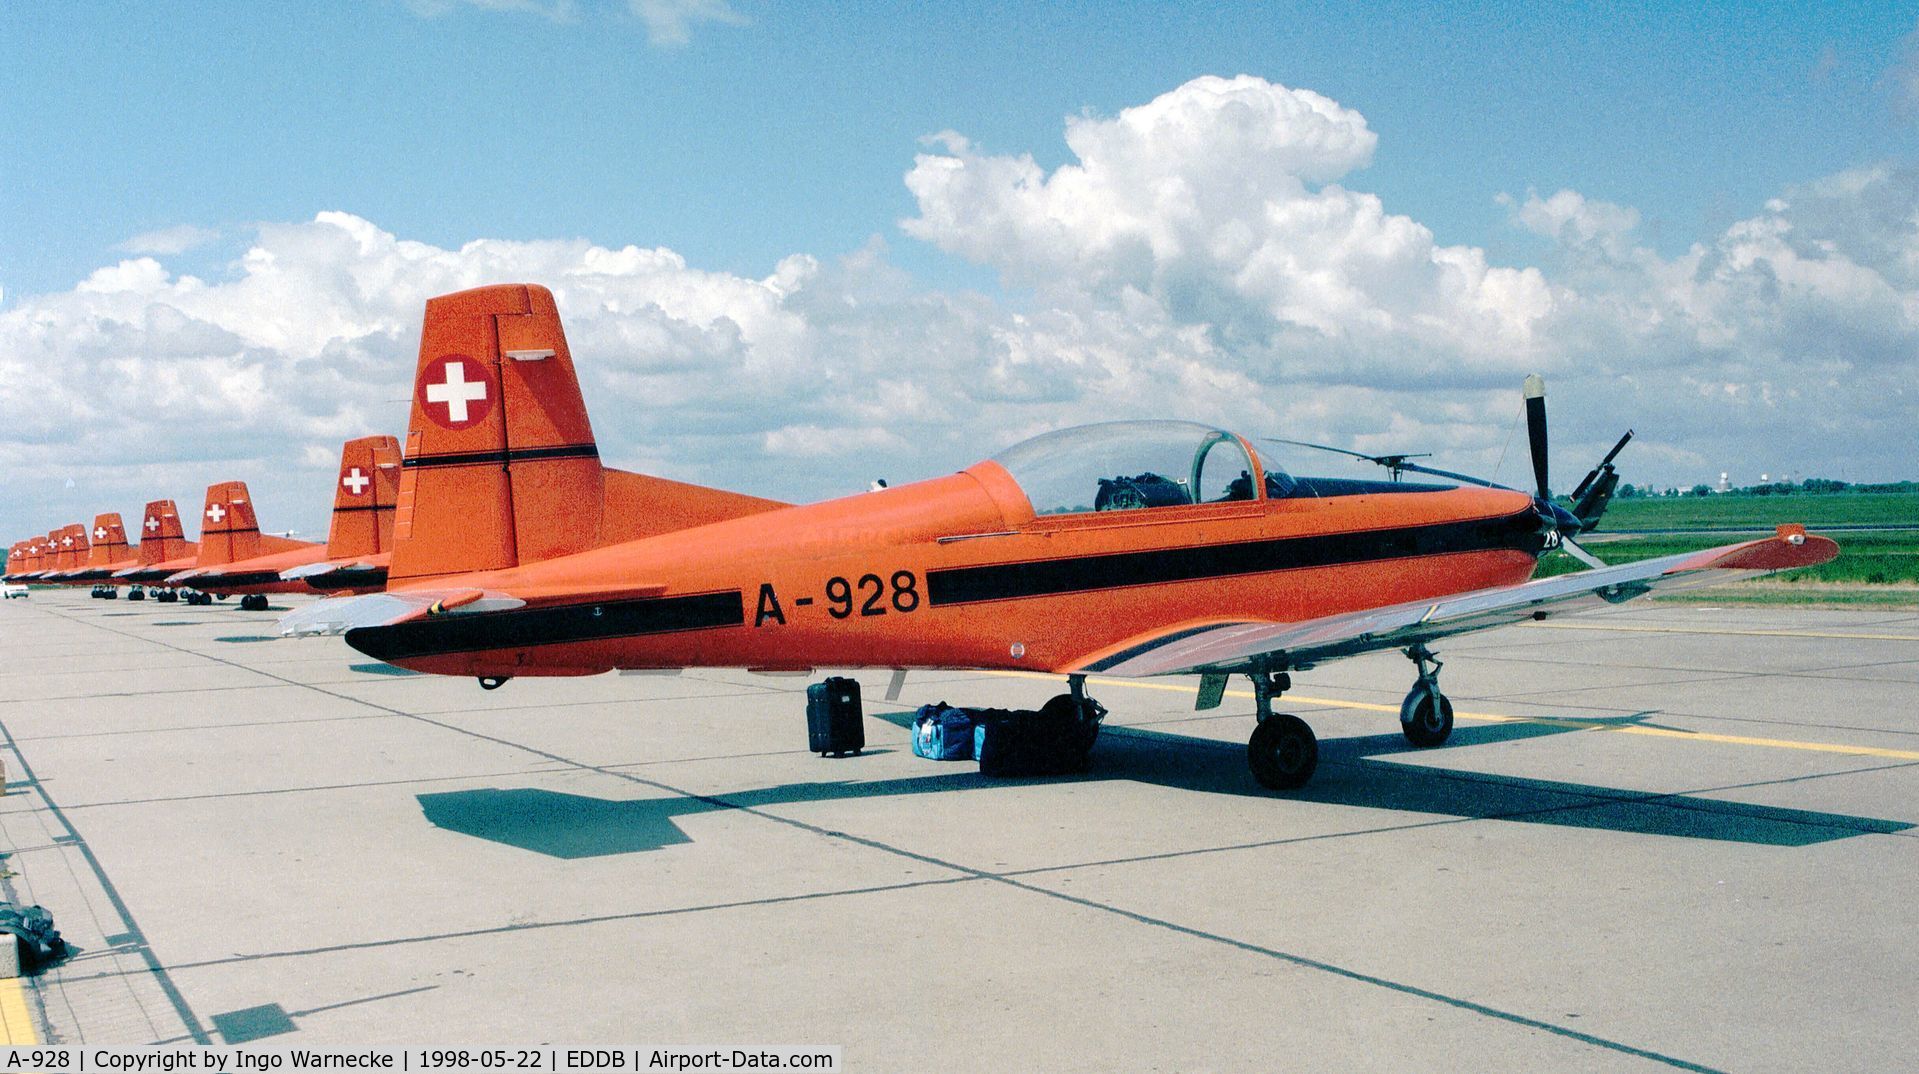 A-928, 1983 Pilatus PC-7 Turbo Trainer C/N 336, Pilatus PC-7 of the Swiss Air Force Display Team (with all it's teammates) at the ILA 1998, Berlin